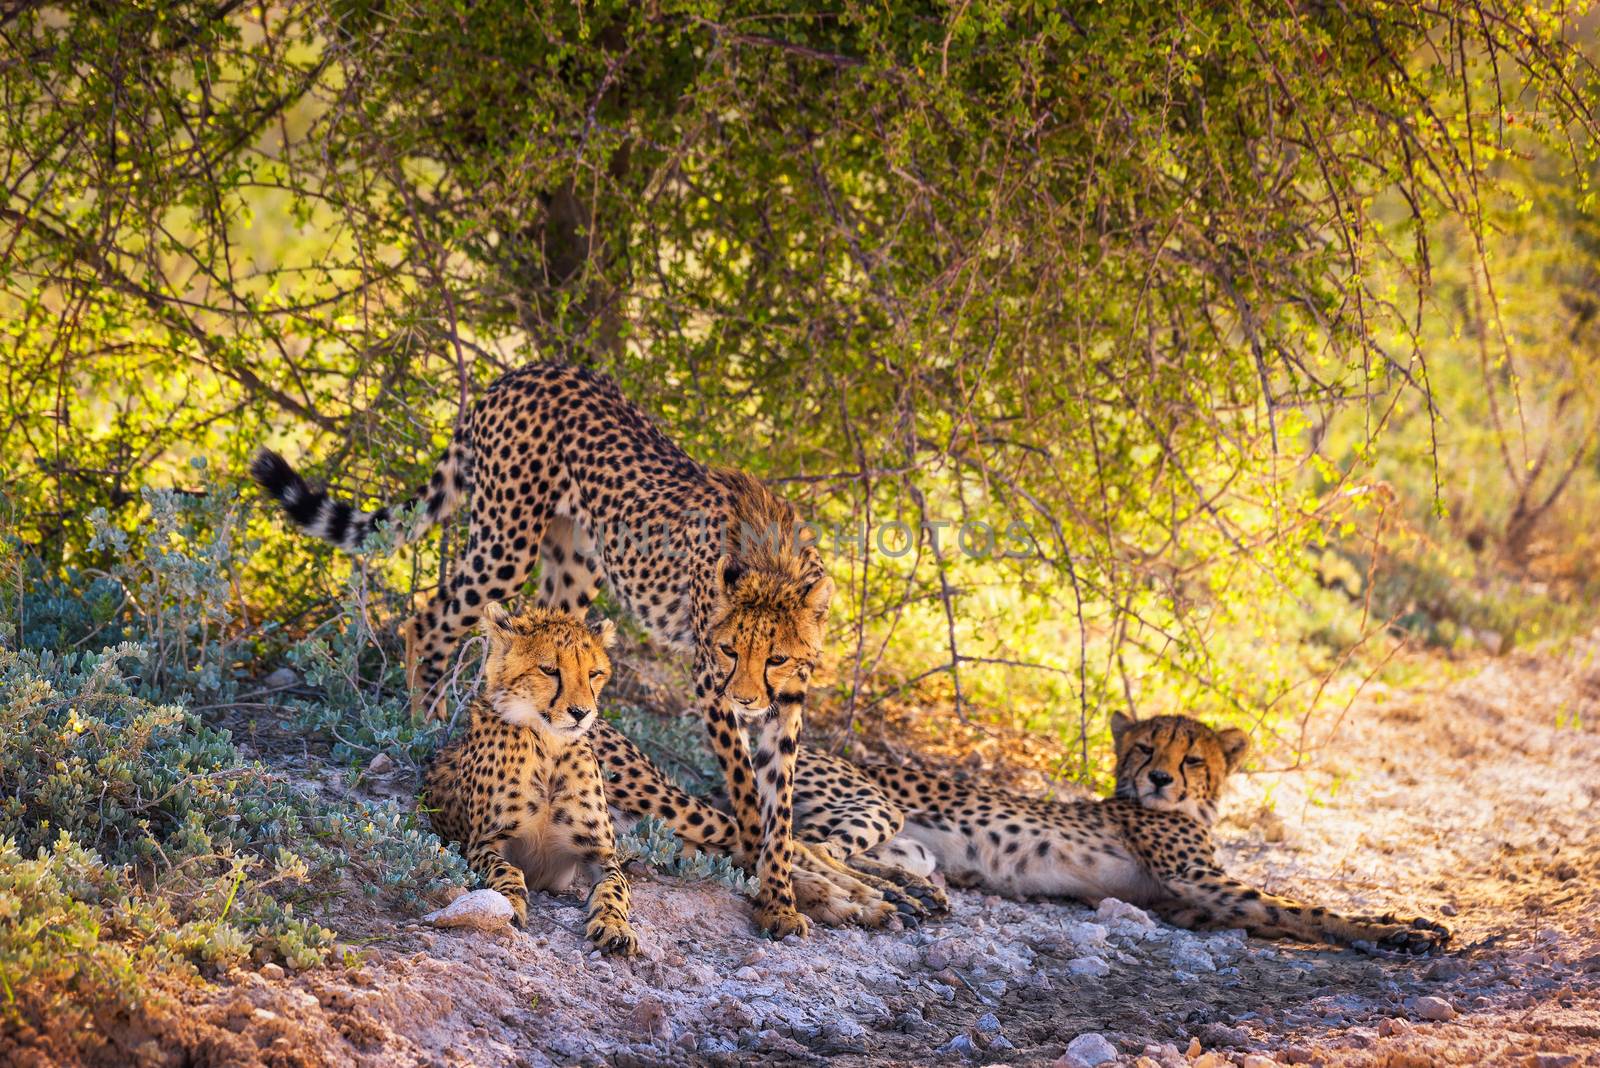 Three cheetahs in the Etosha National Park, the largest wildlife reserve in Namibia